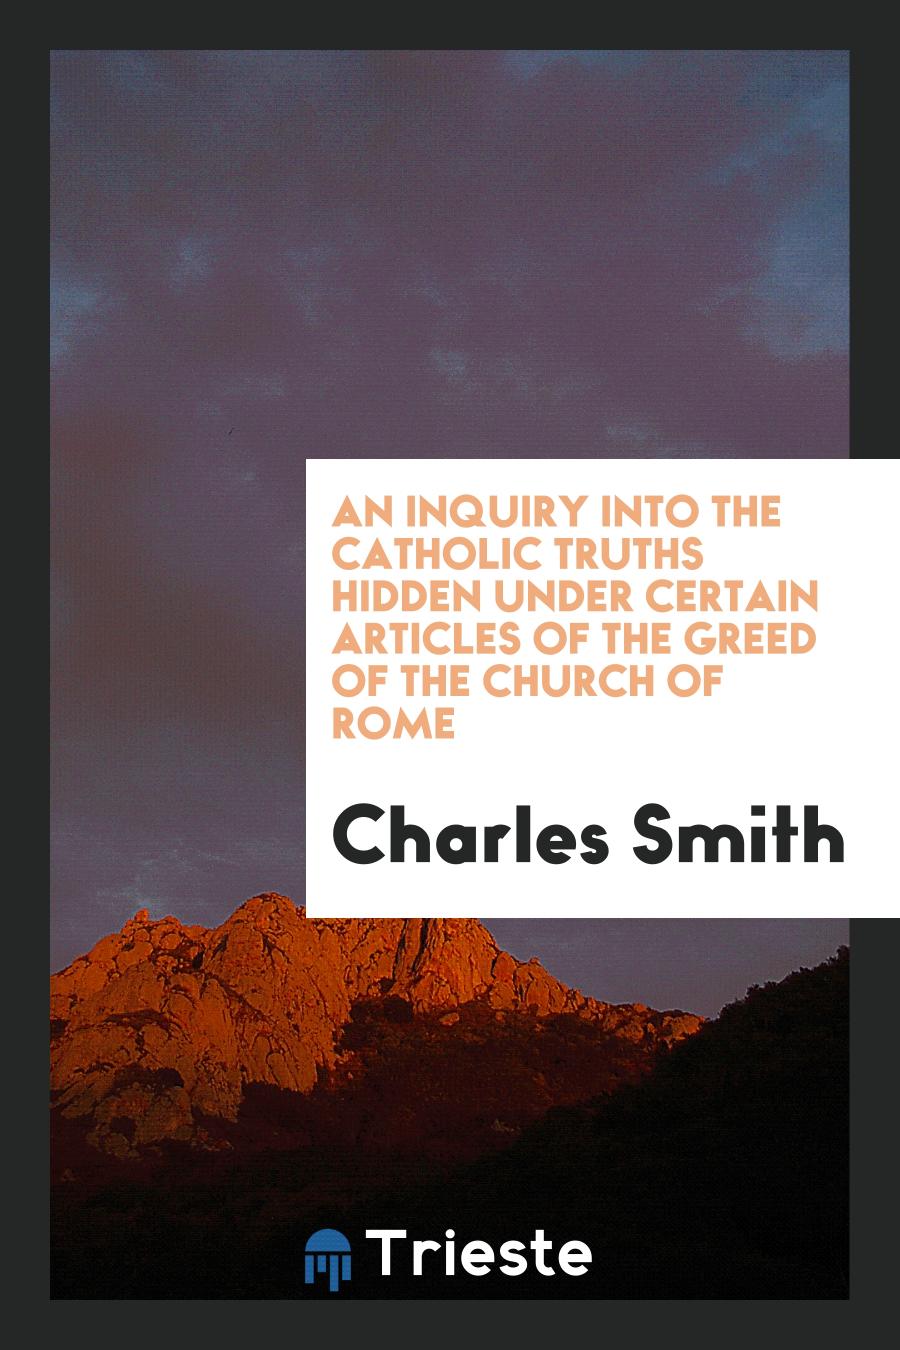 An Inquiry Into the Catholic Truths Hidden Under Certain Articles of the Greed of the Church of Rome